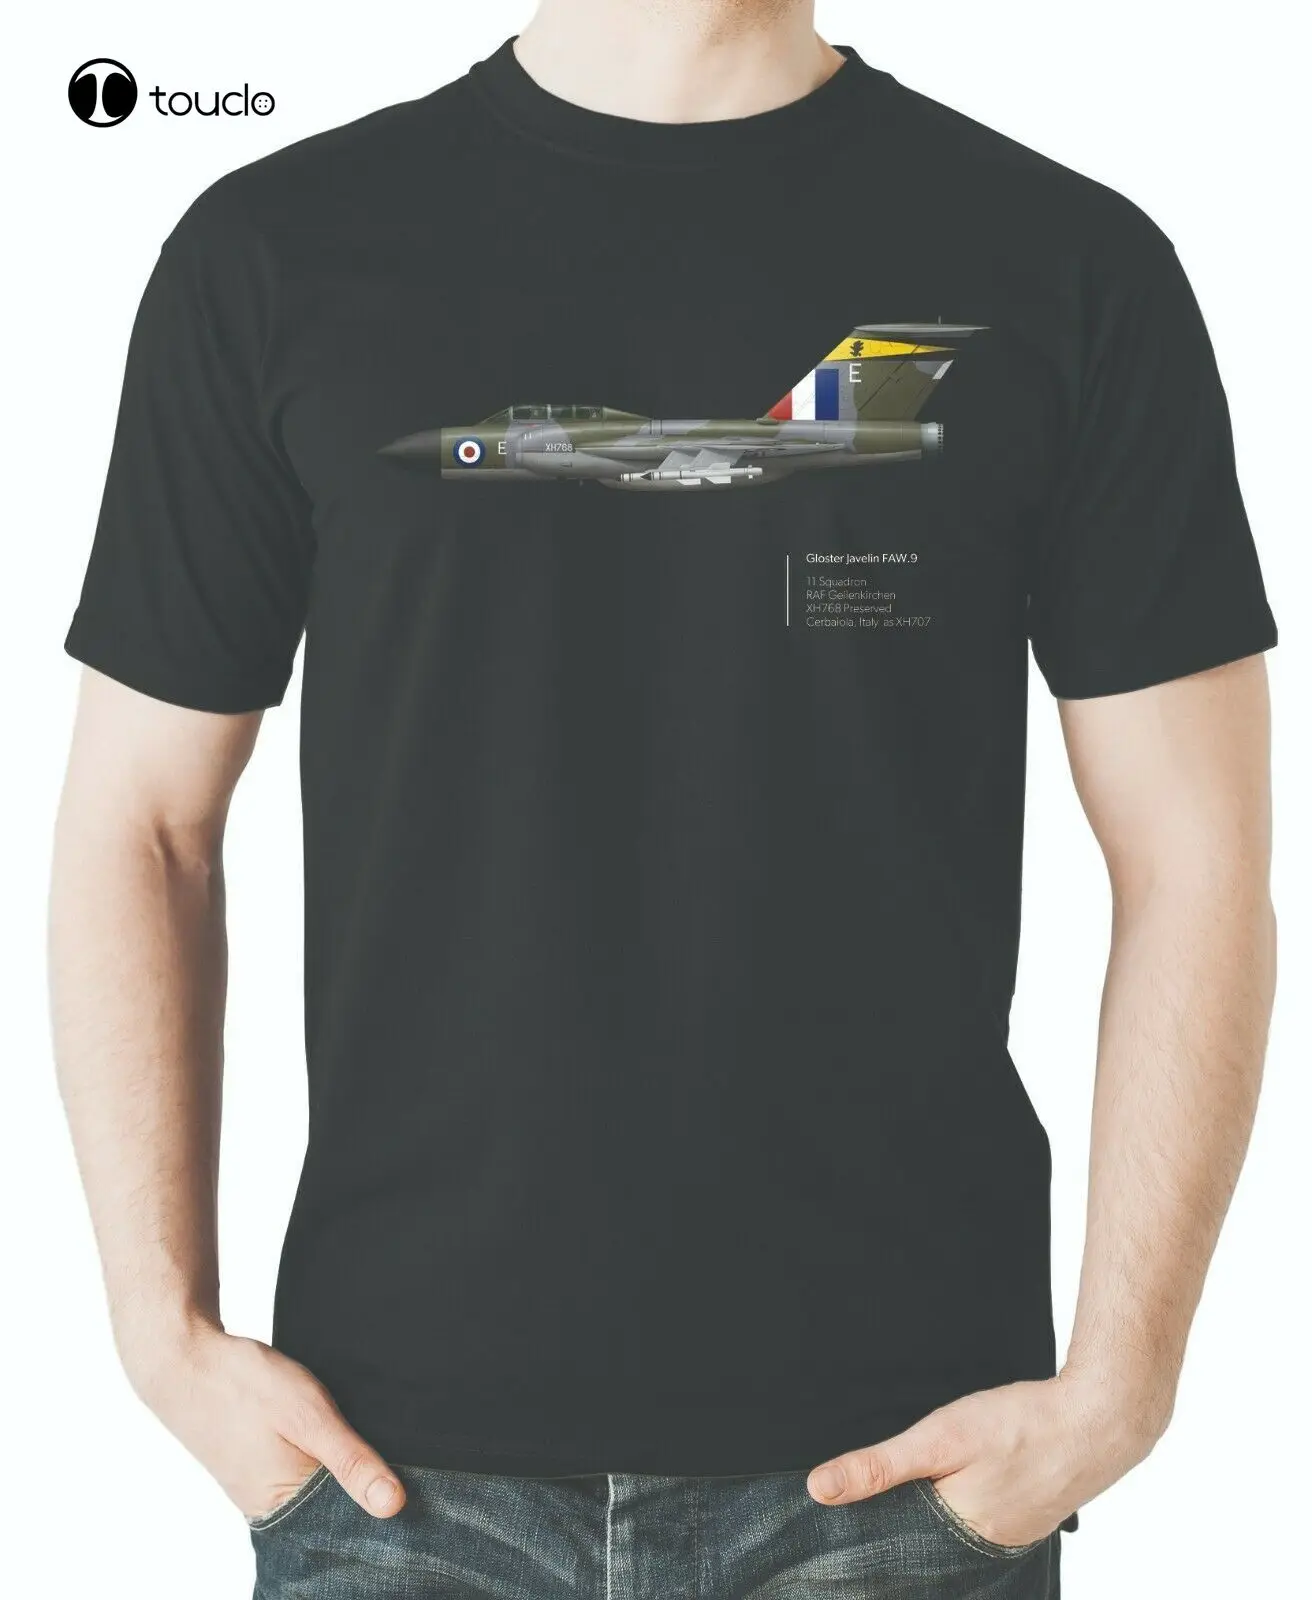 

Royal Air Force Gloster Javelin Faw.9 Aviation Themed T-Shirt. Summer Cotton Short Sleeve O-Neck Mens T Shirt New S-5Xl Unisex